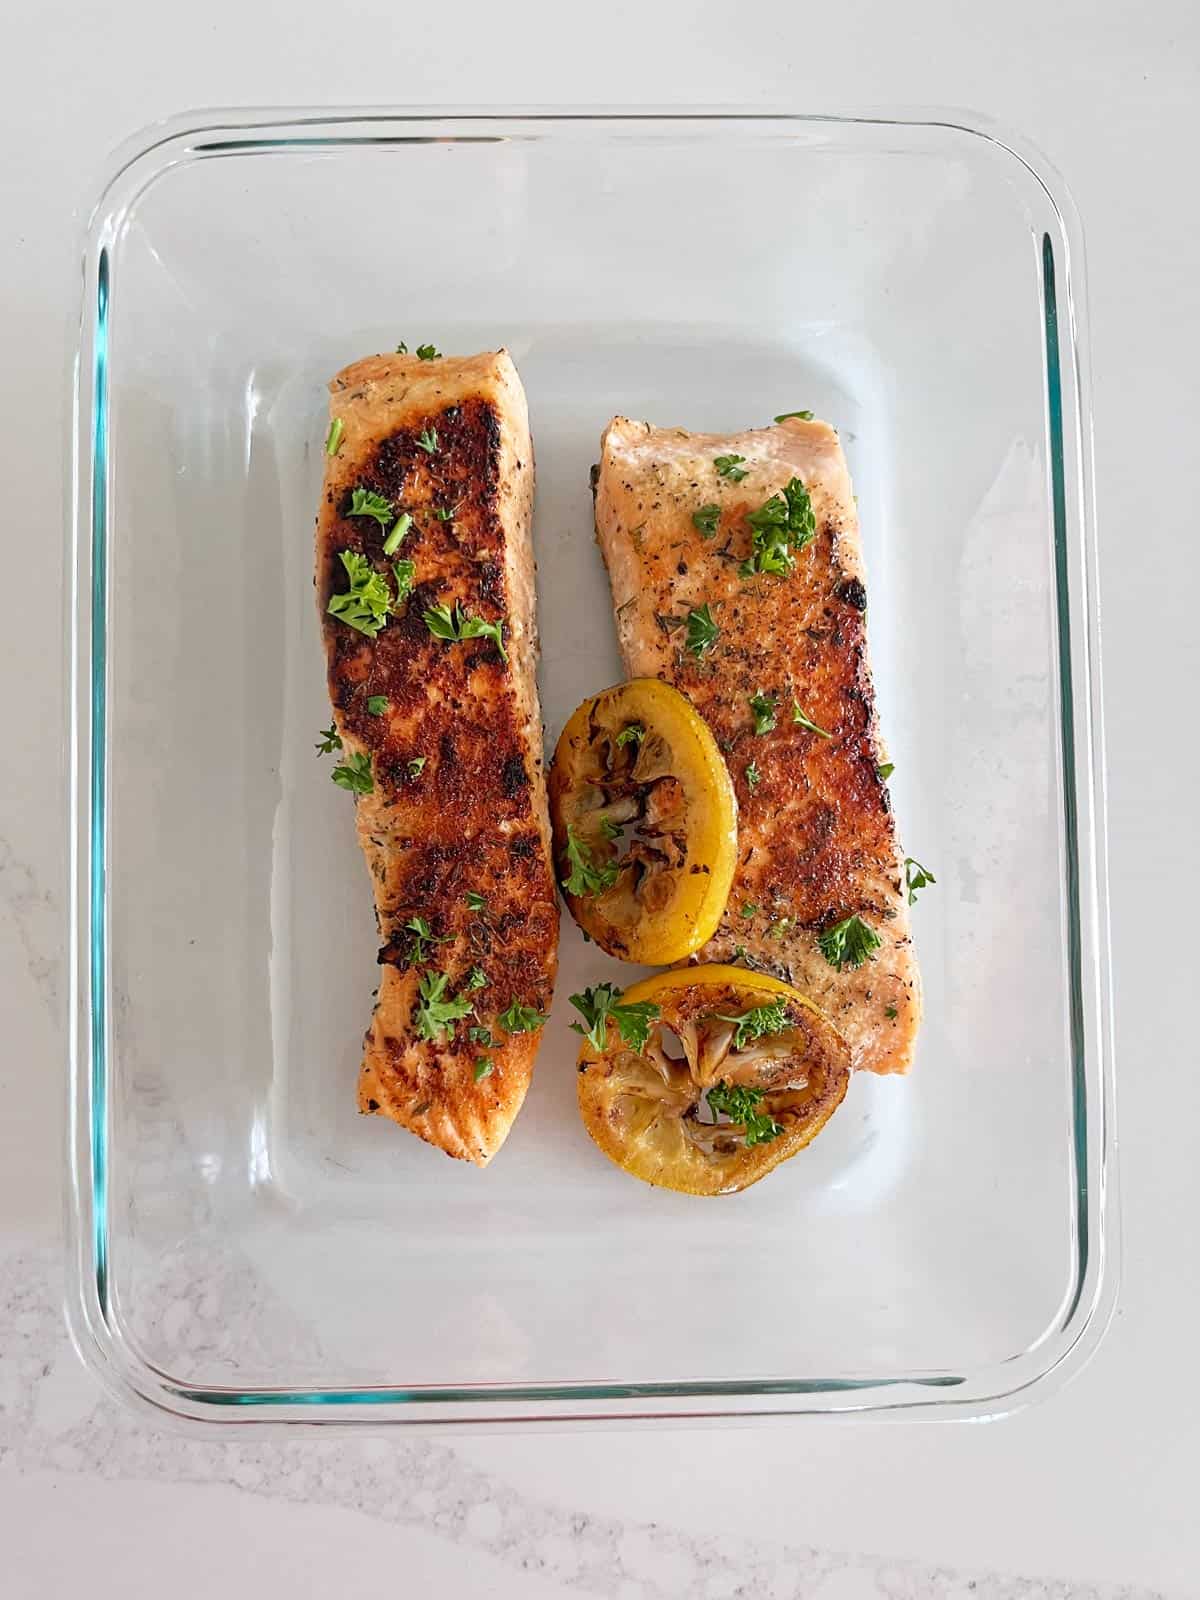 Pan-seared salmon leftovers are stored in a glass food storage container.